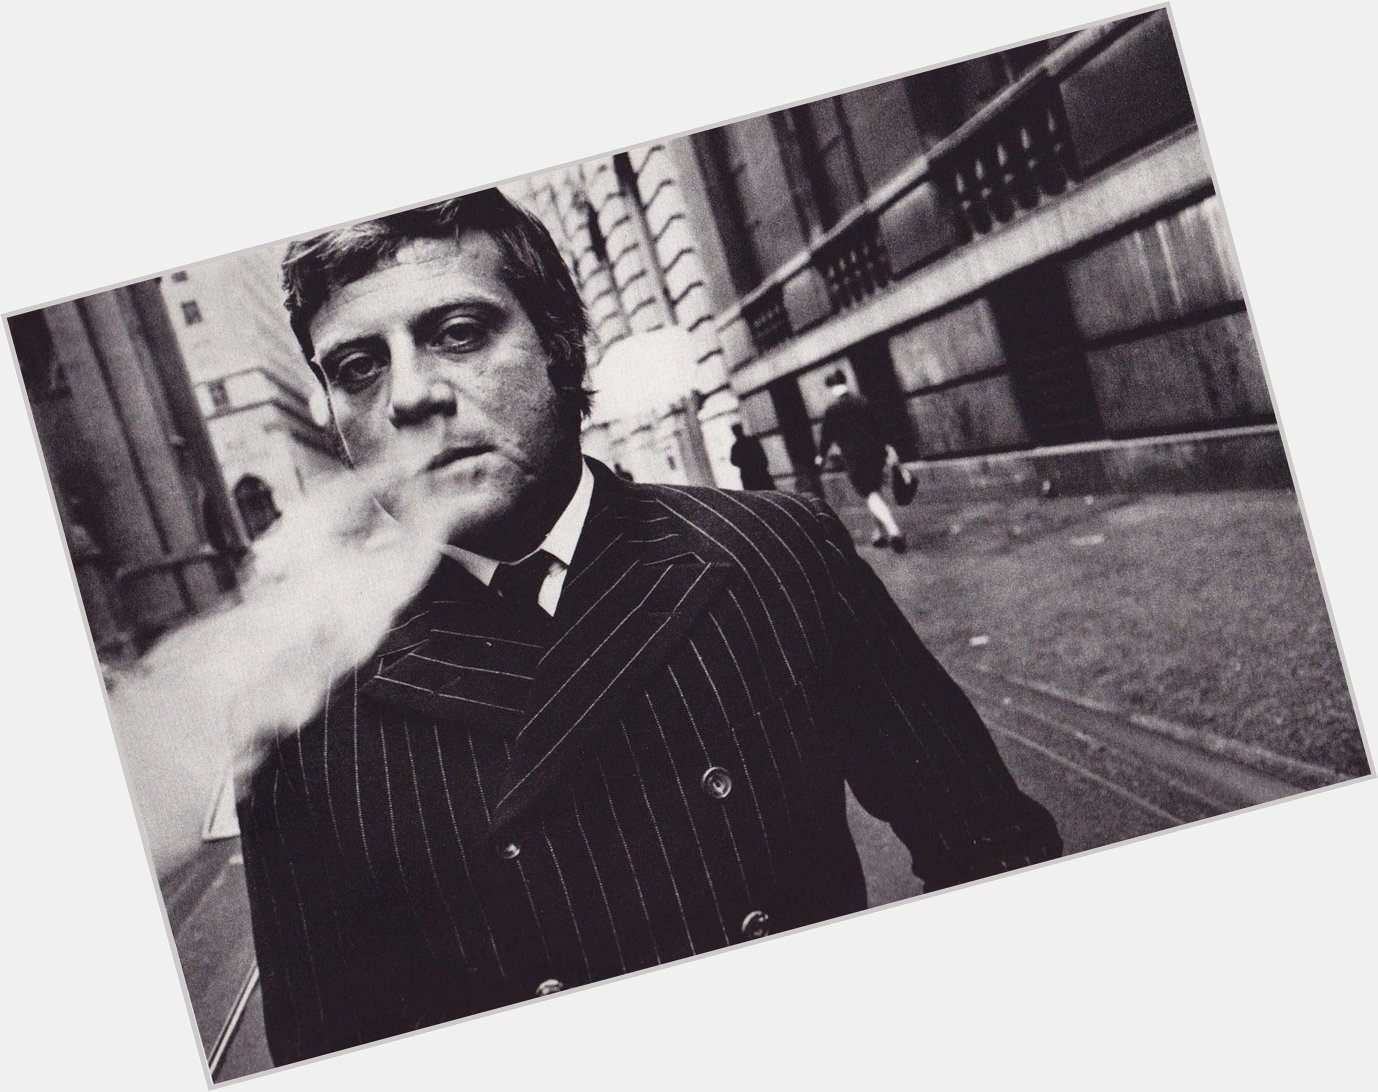 Oh, Oliver Reed. Happy birthday you rascal, you. 